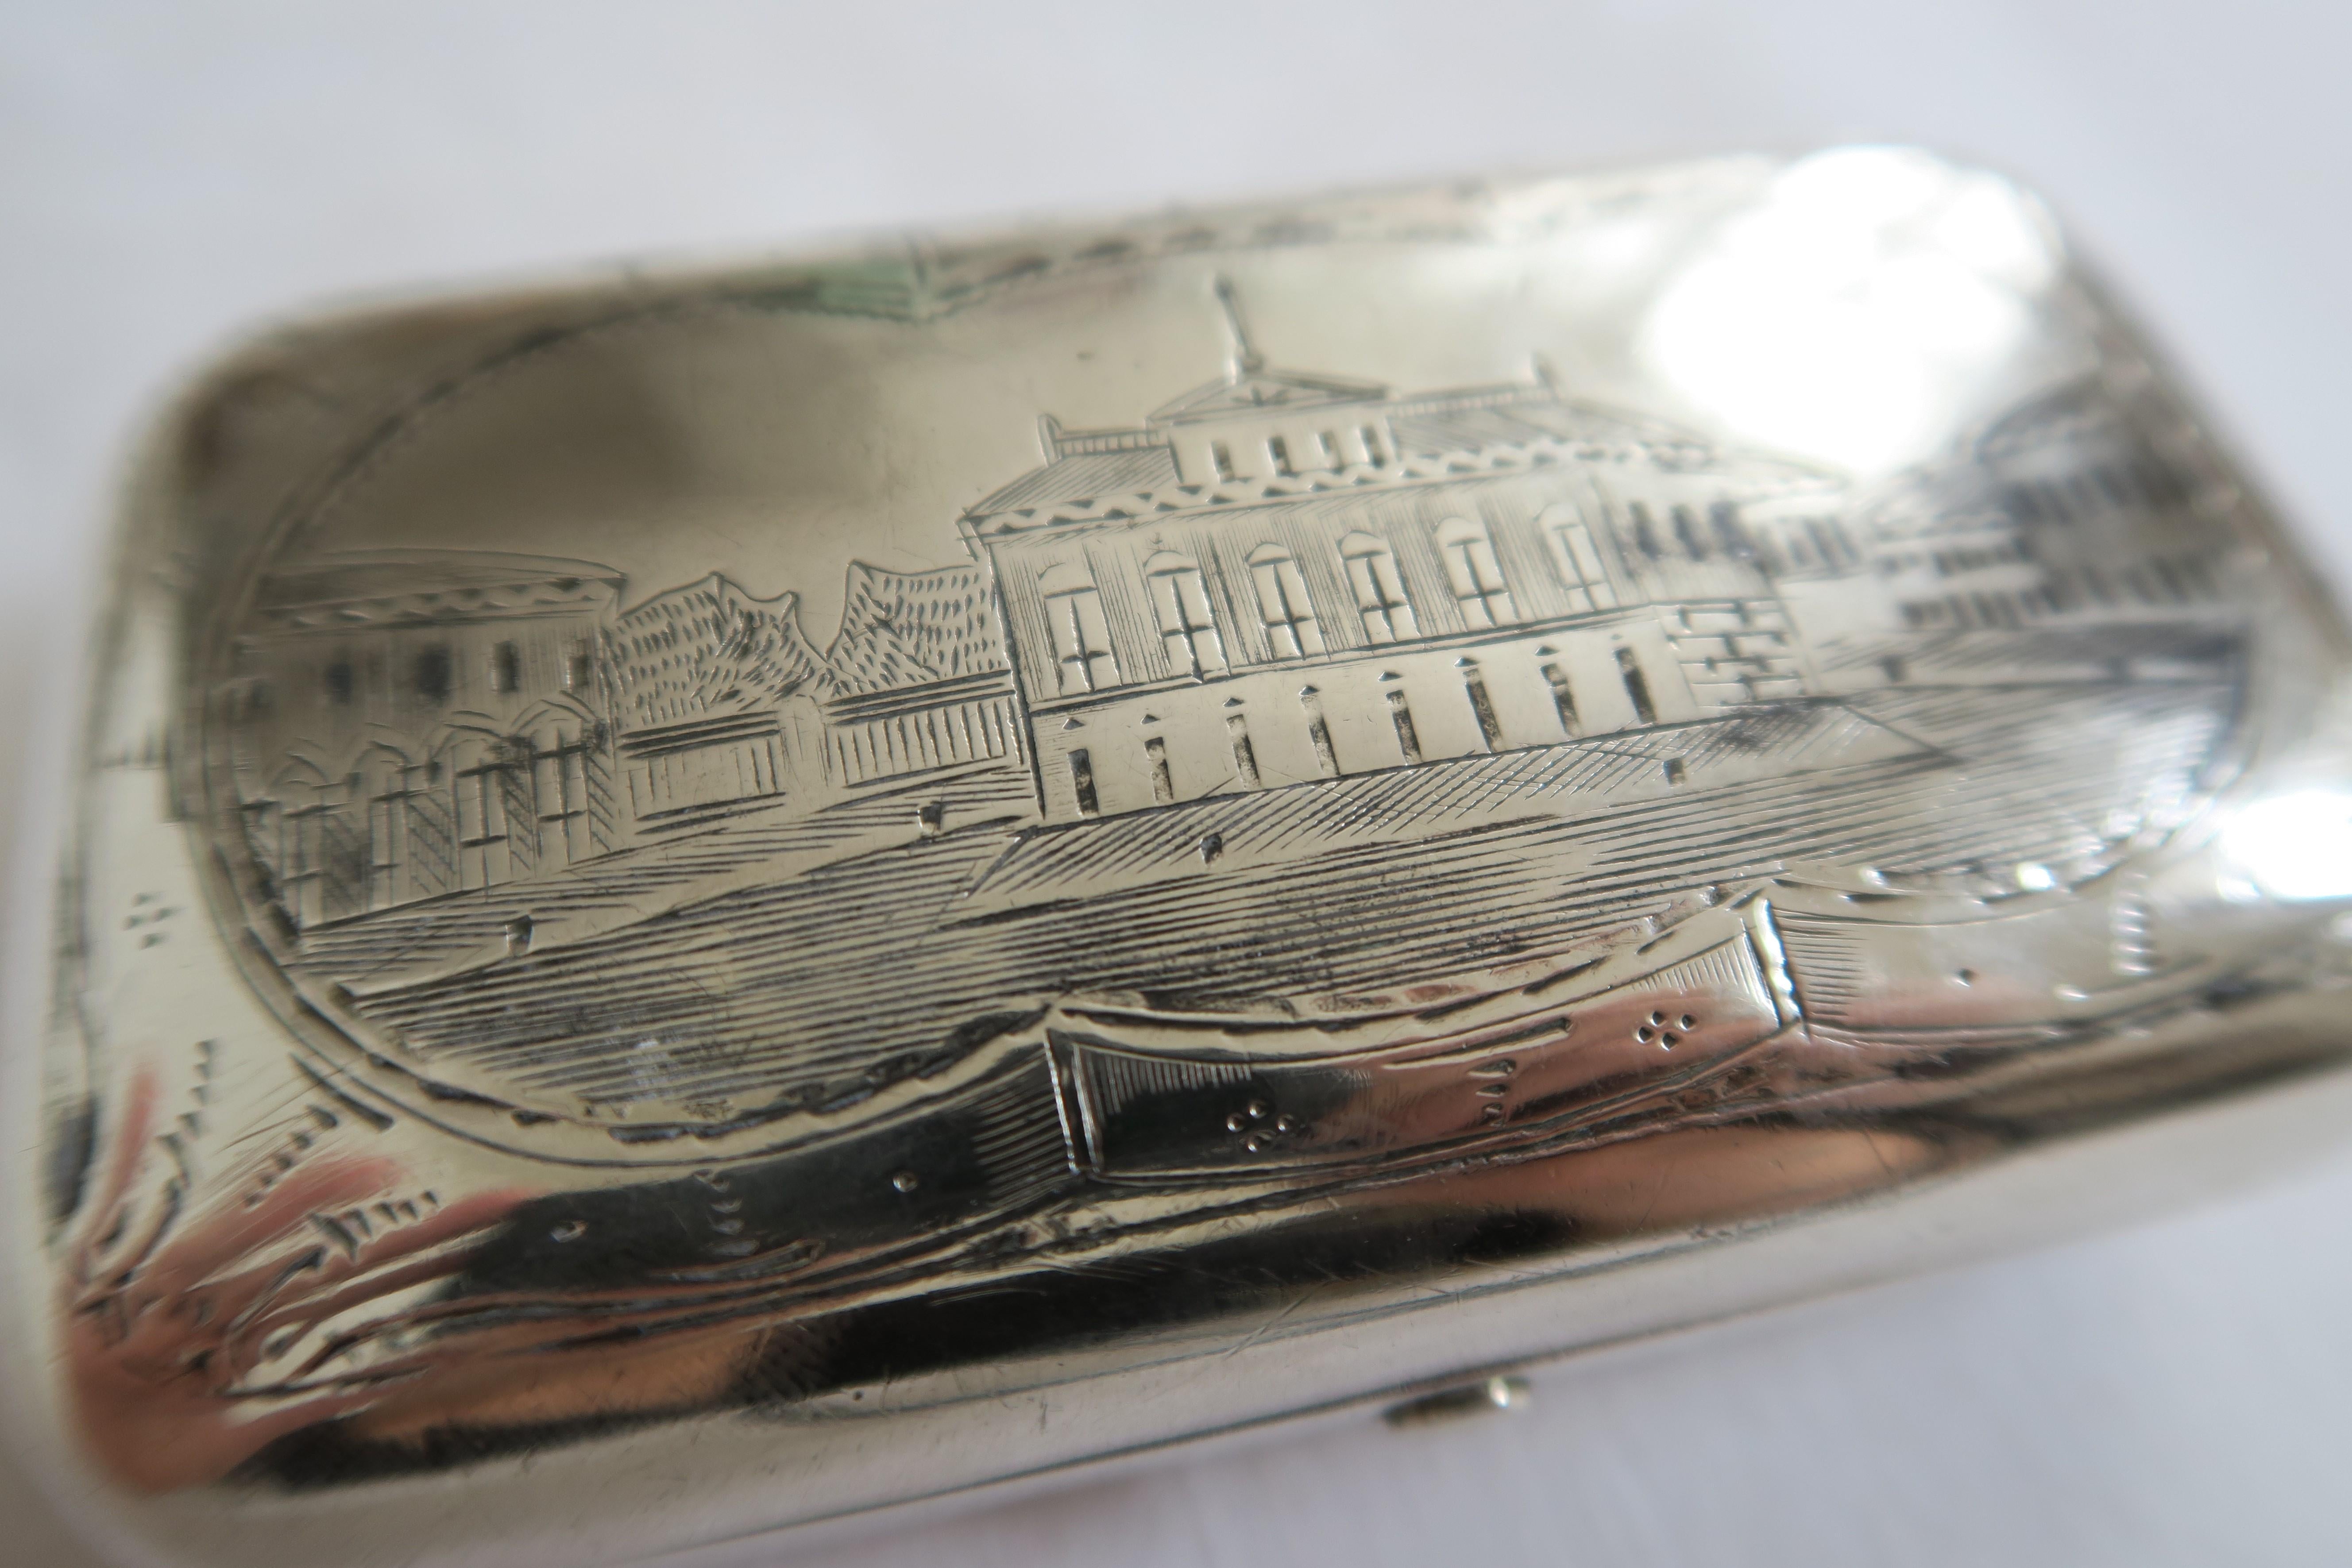 The item for sale is a Tular silver snuffbox. It has an oval shape and the lid is engraved with a Moscow landmark building in an ornamental frame. The backside is engraved with chess board pattern and a generously ornamented crest carrying the